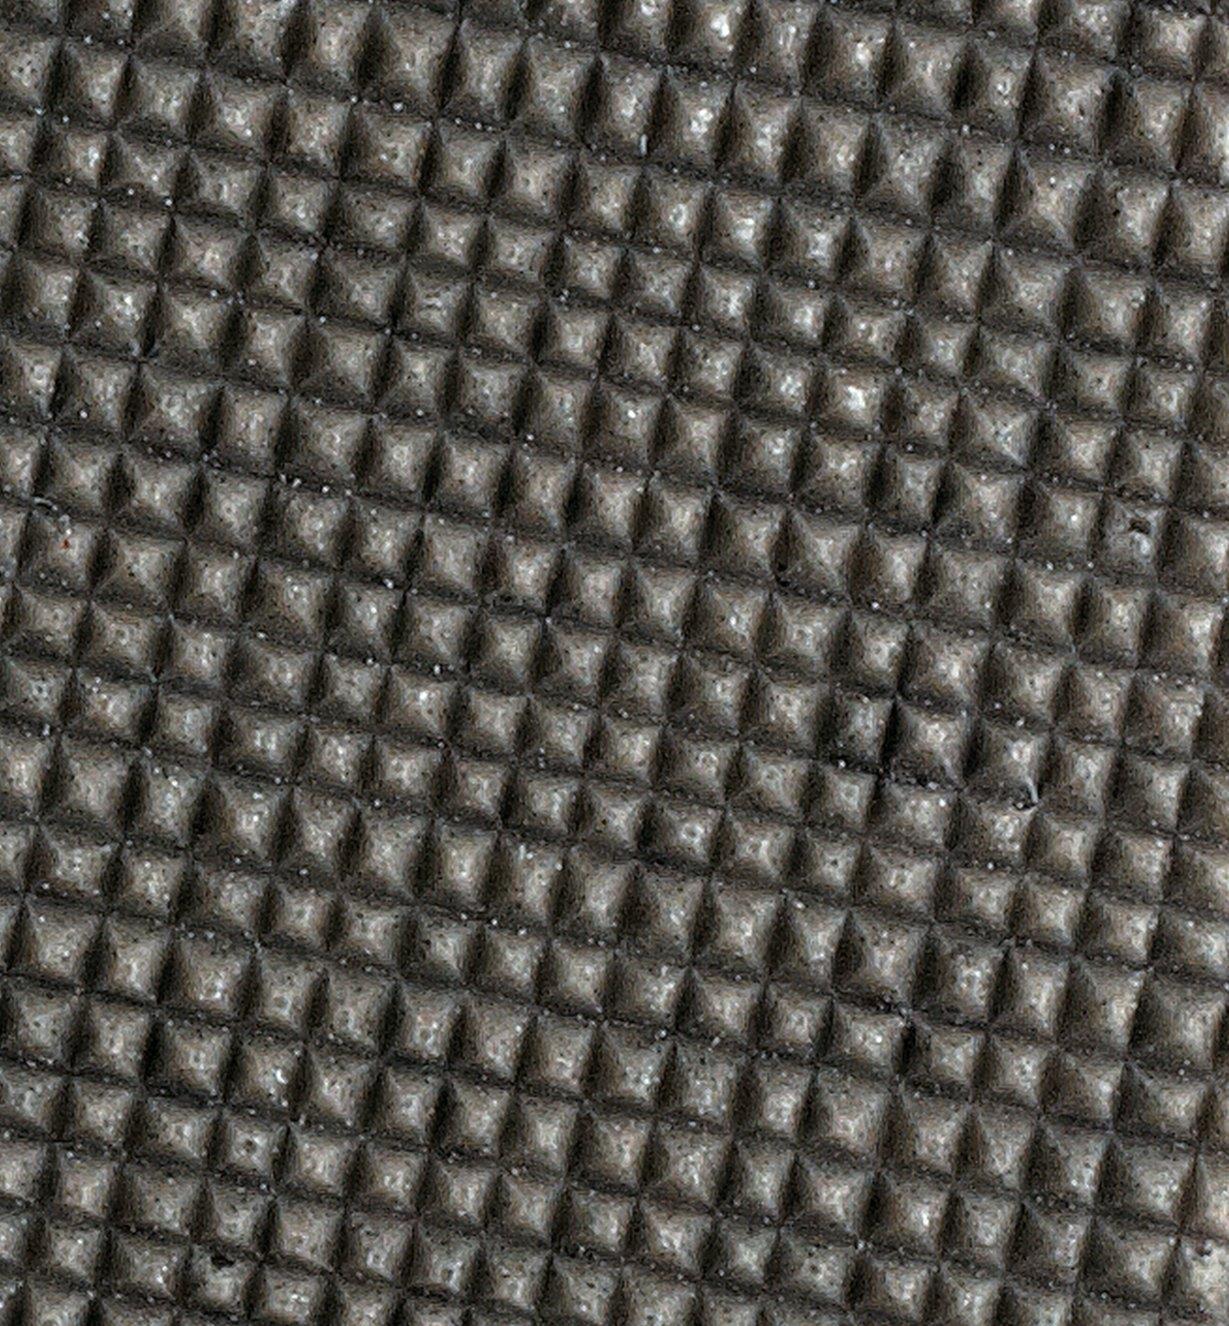 Close-up of grit particles